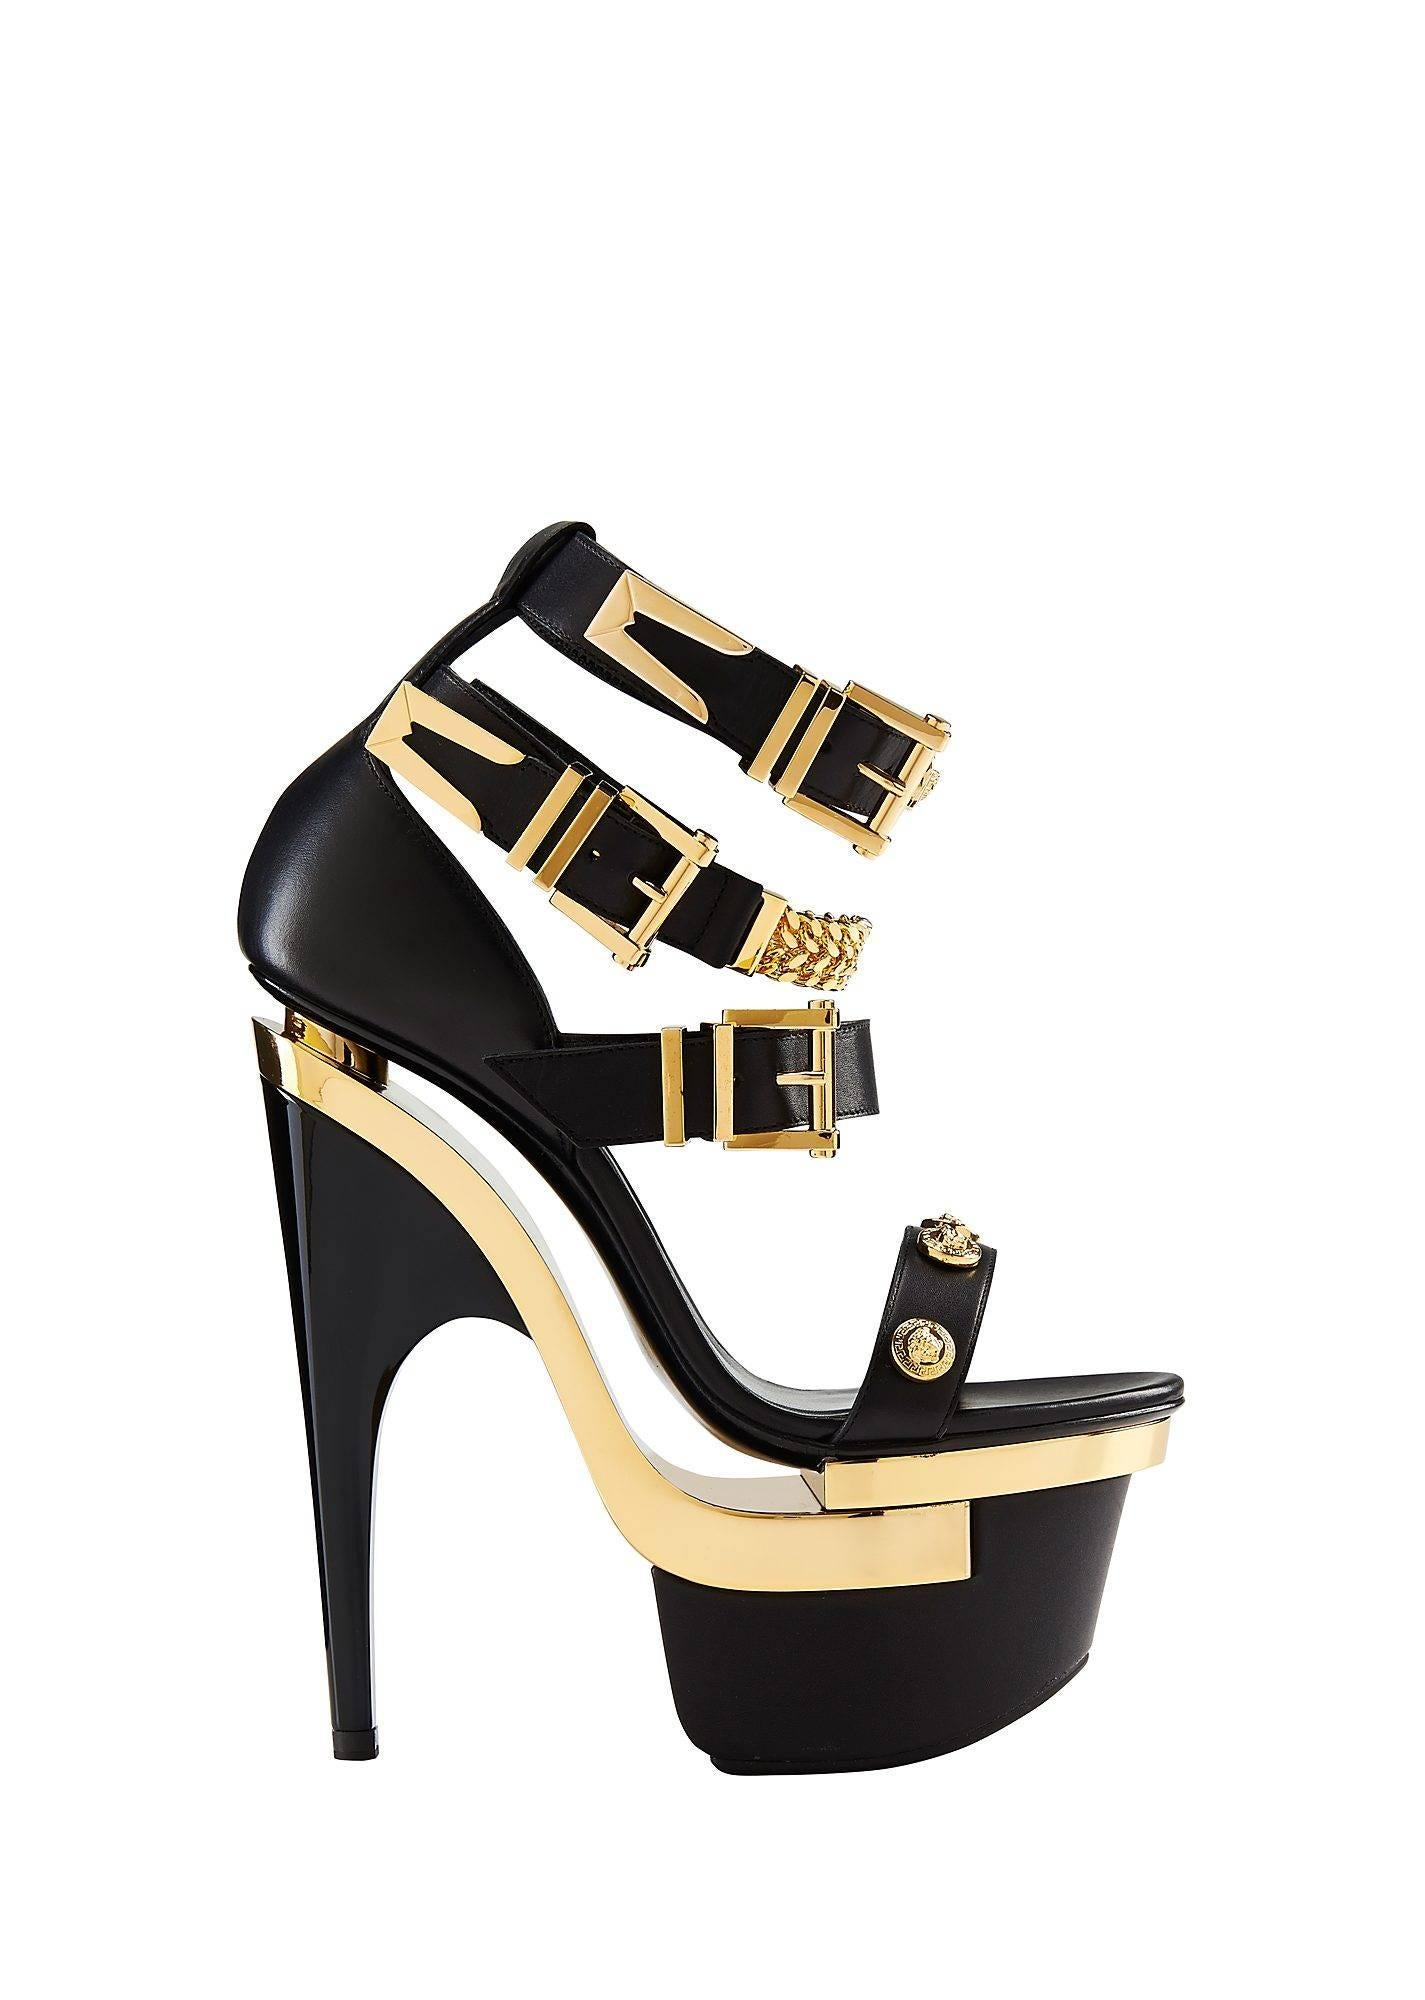 VERSACE 

Studded platform sandals

Three ankle buckles, gold sole plaques, platform at front, stiletto curved heel, heel measures approx. 16 cm

100% leather
 
IT Size 35 - US 5

Made in Italy

Brand new. In original VERSACE box.

  